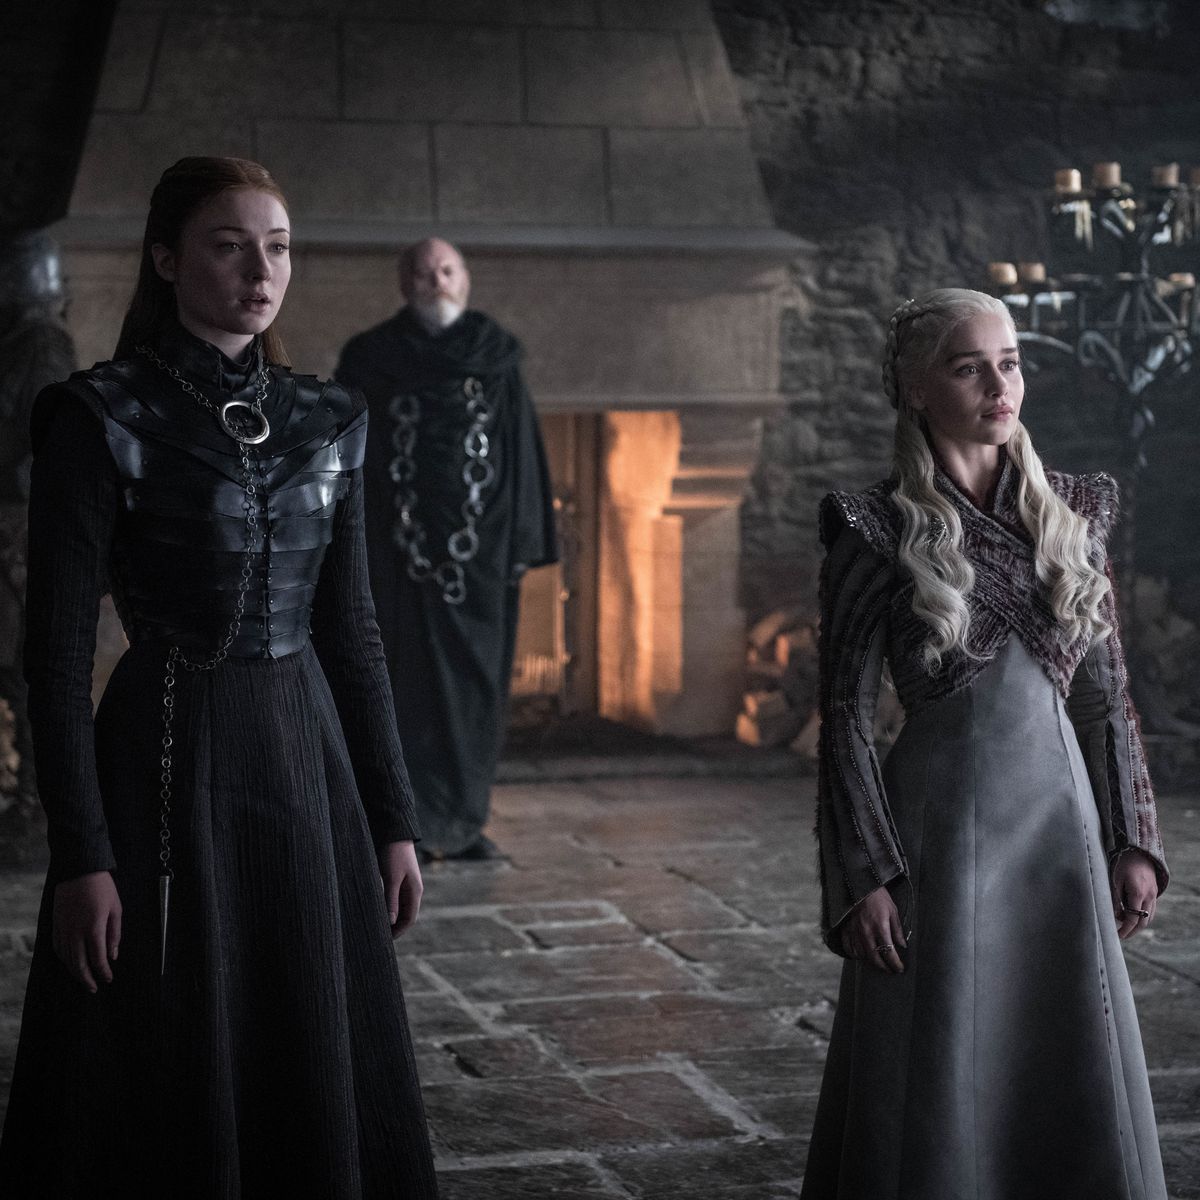 Game of Thrones: Does the Jewelry Offer Any Clues to the Season 8 Finale?